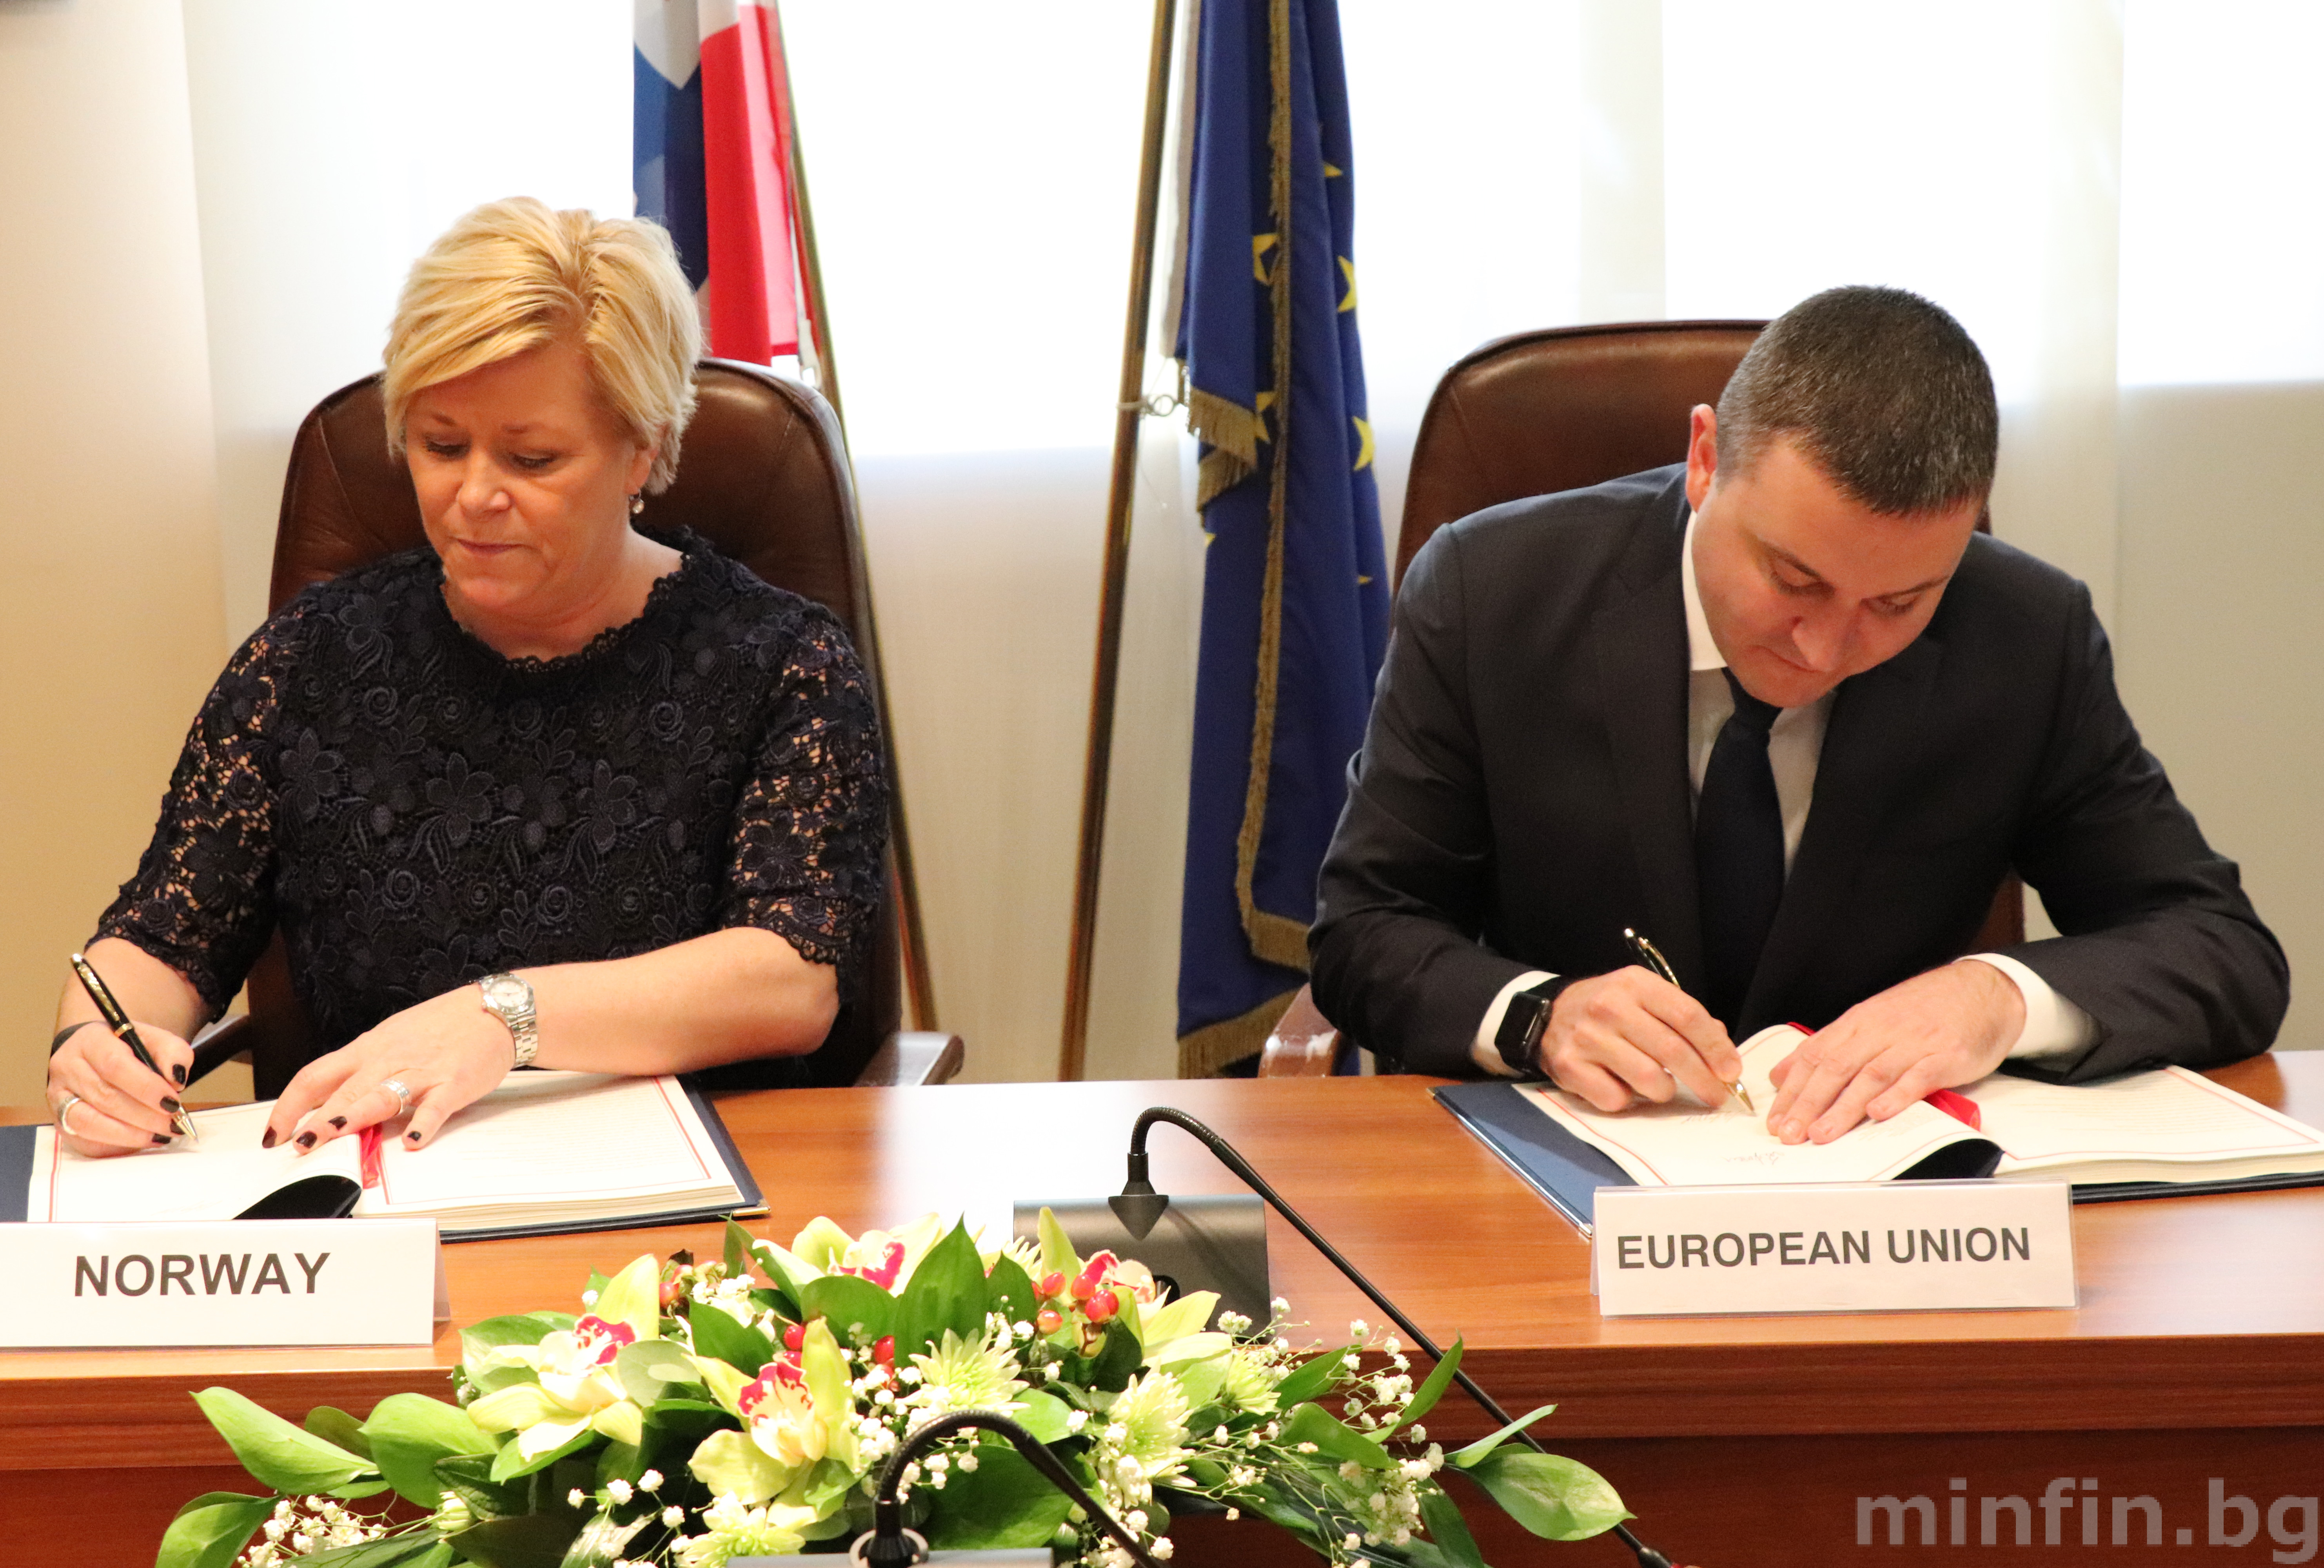 AGREEMENT SIGNED BETWEEN THE EUROPEAN UNION AND THE KINGDOM OF NORWAY ON ADMINISTRATIVE COOPERATION, COMBATING FRAUD AND RECOVERY OF CLAIMS IN THE FIELD OF VALUE ADDED TAX